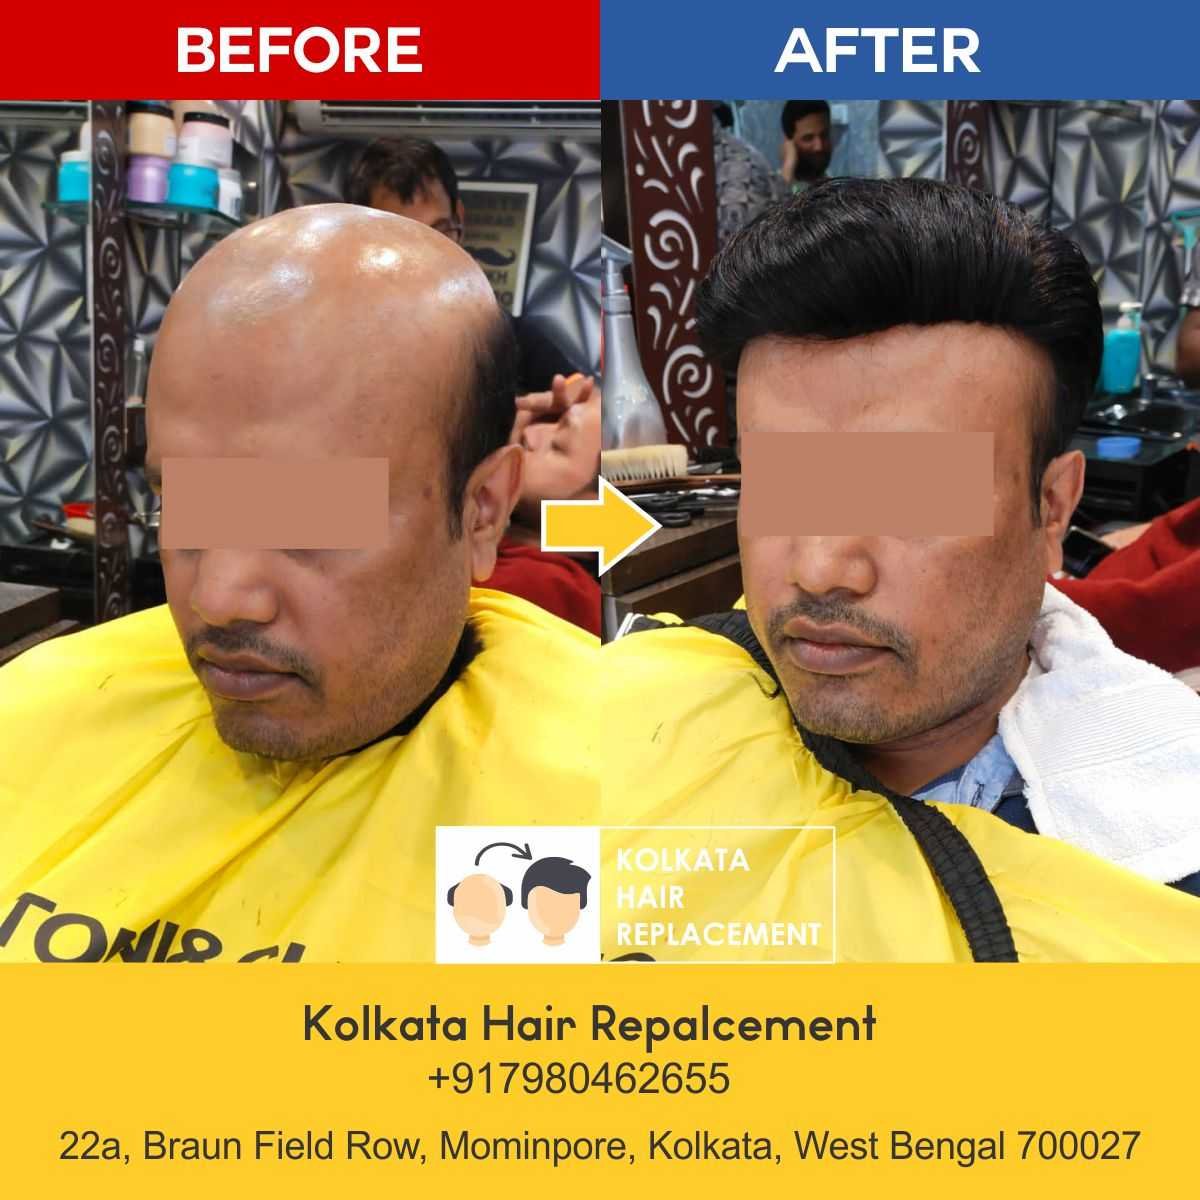 men-hair-wig-patch-kolkata-hair-replacement-before-after-02